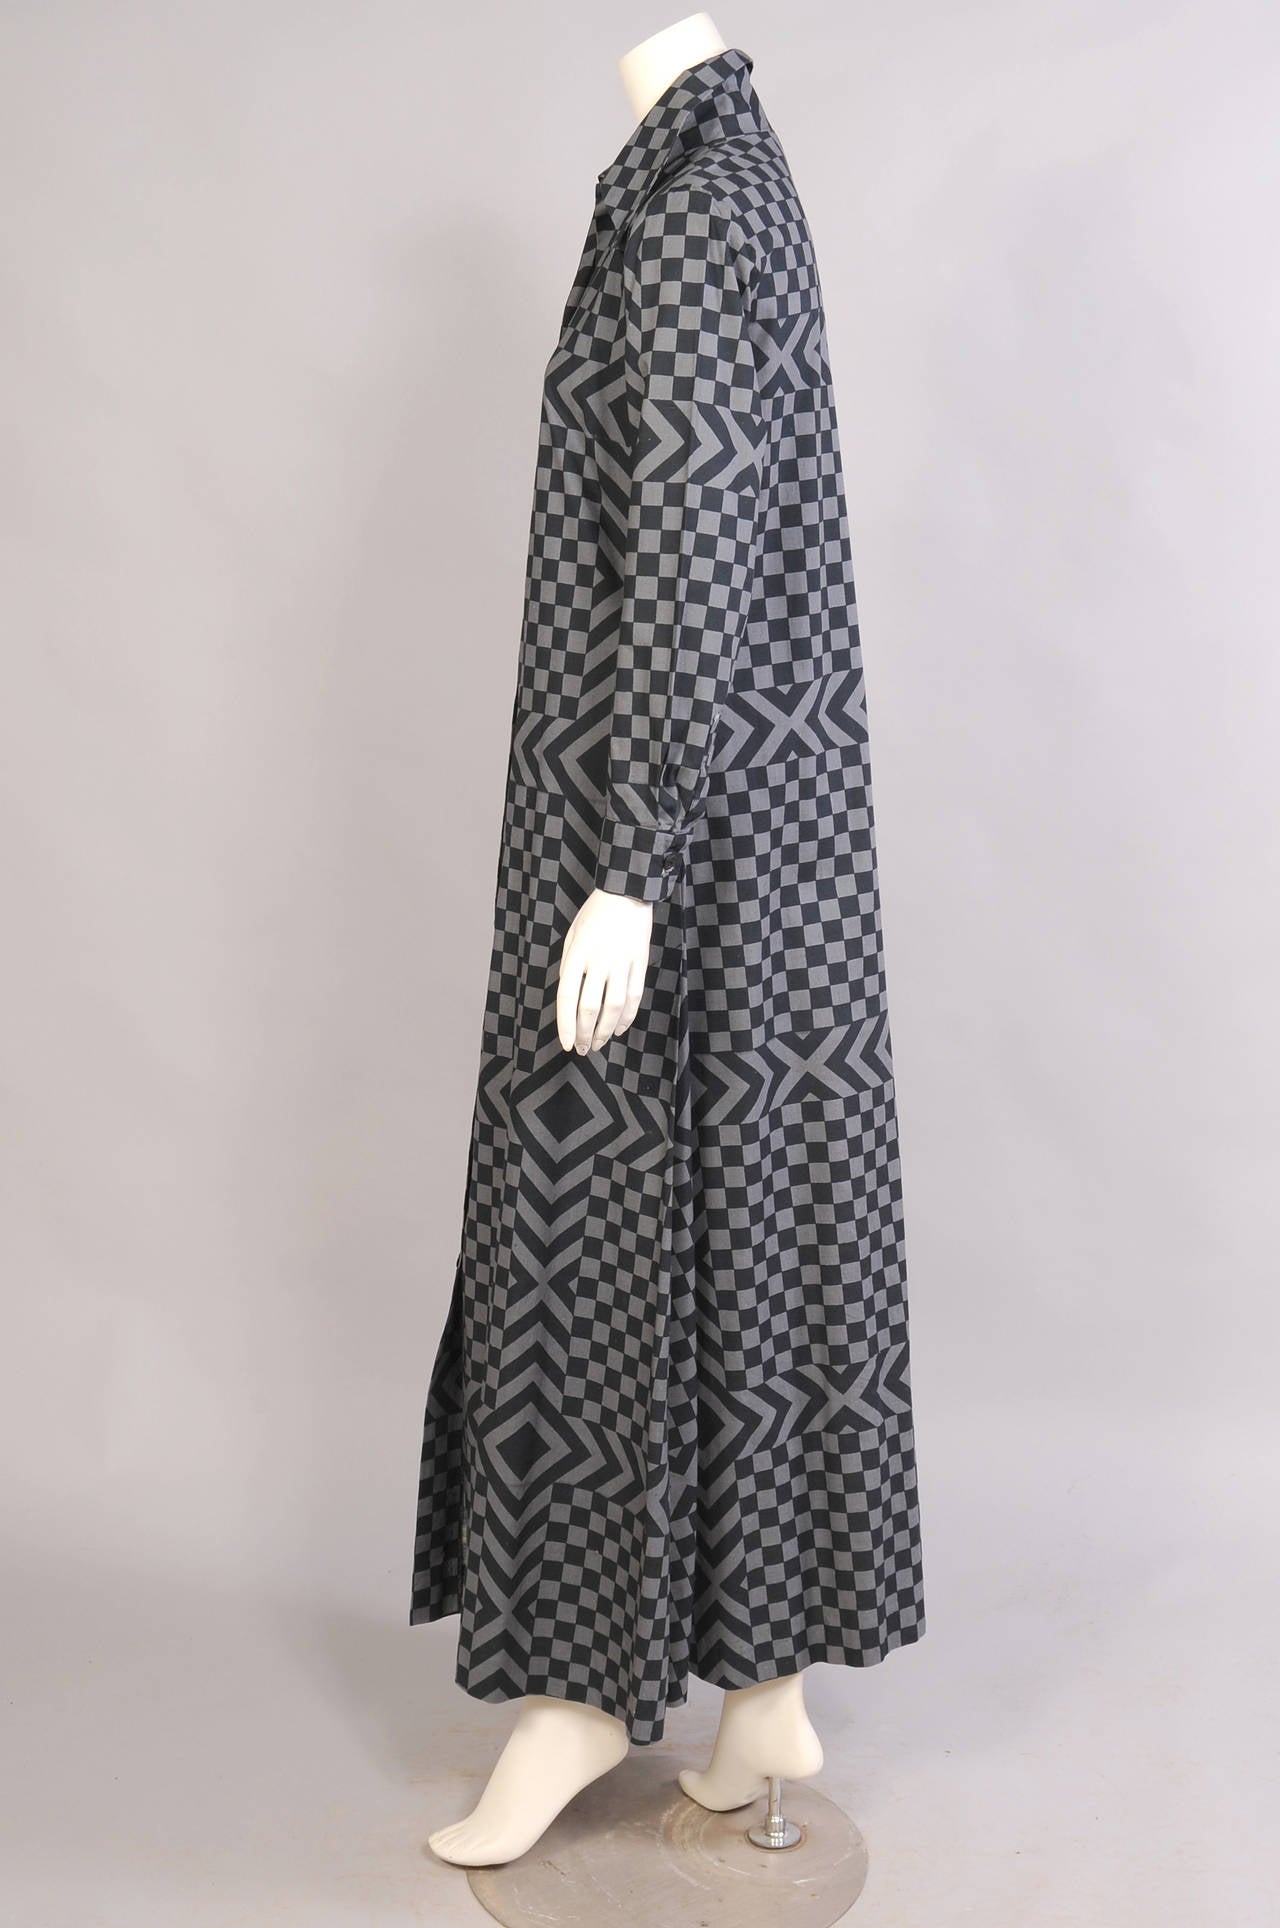 A chic black and grey color combination in the Ruuturita pattern, first designed in 1974, makes a very chic long cotton dress for day or evening. The dress buttons down the front, comes with a matching belt, and it is marked a size 42/14. It is in